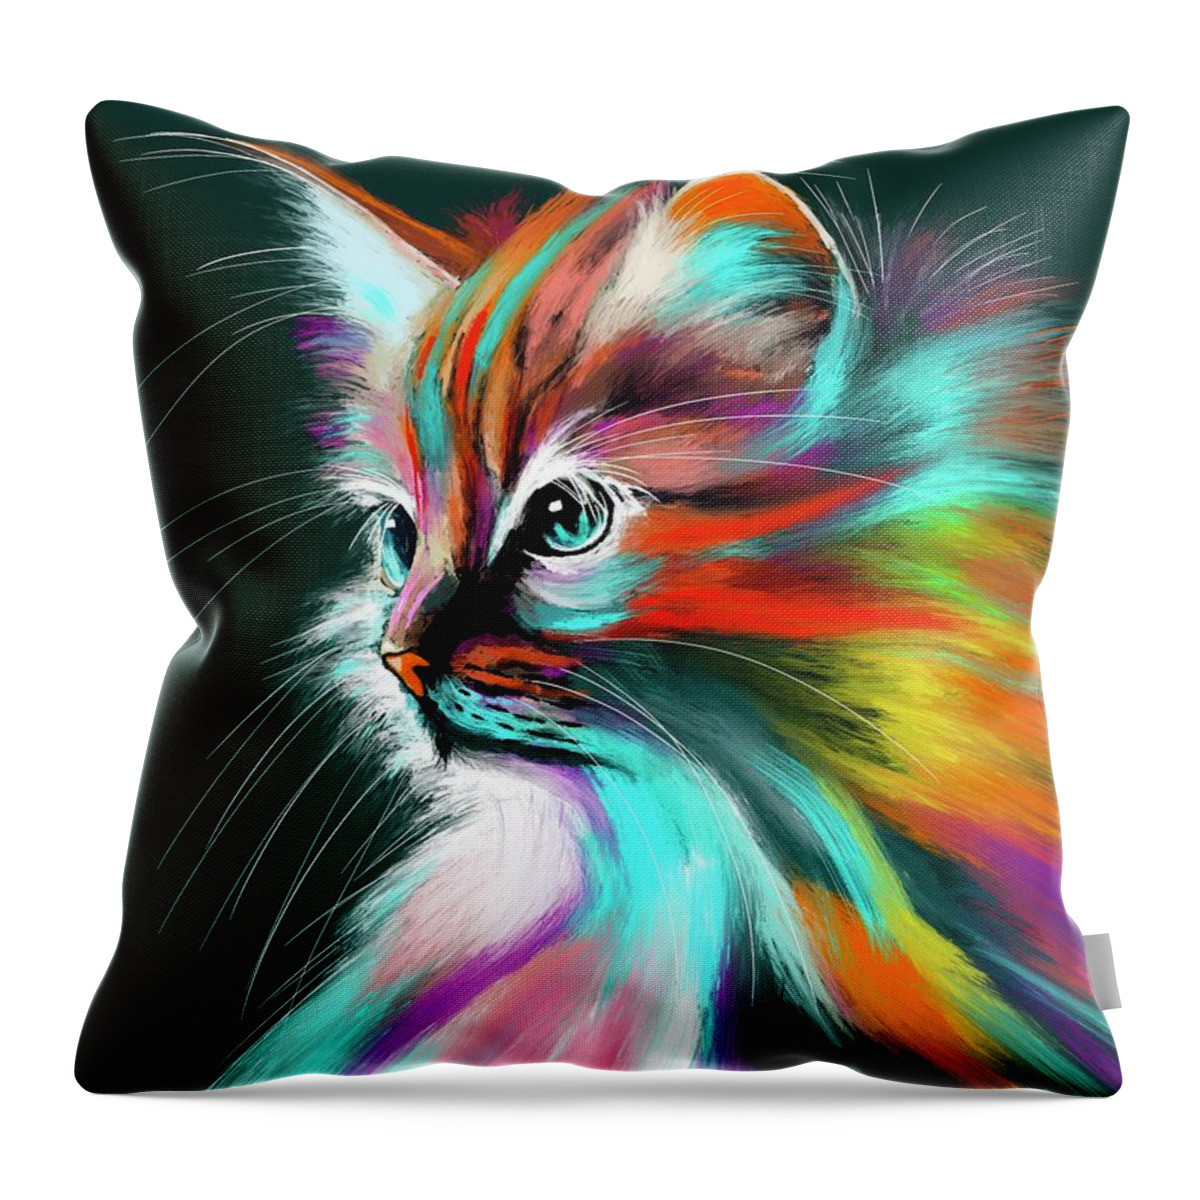 Cat Throw Pillow featuring the digital art Colorful Cat by Mark Ross